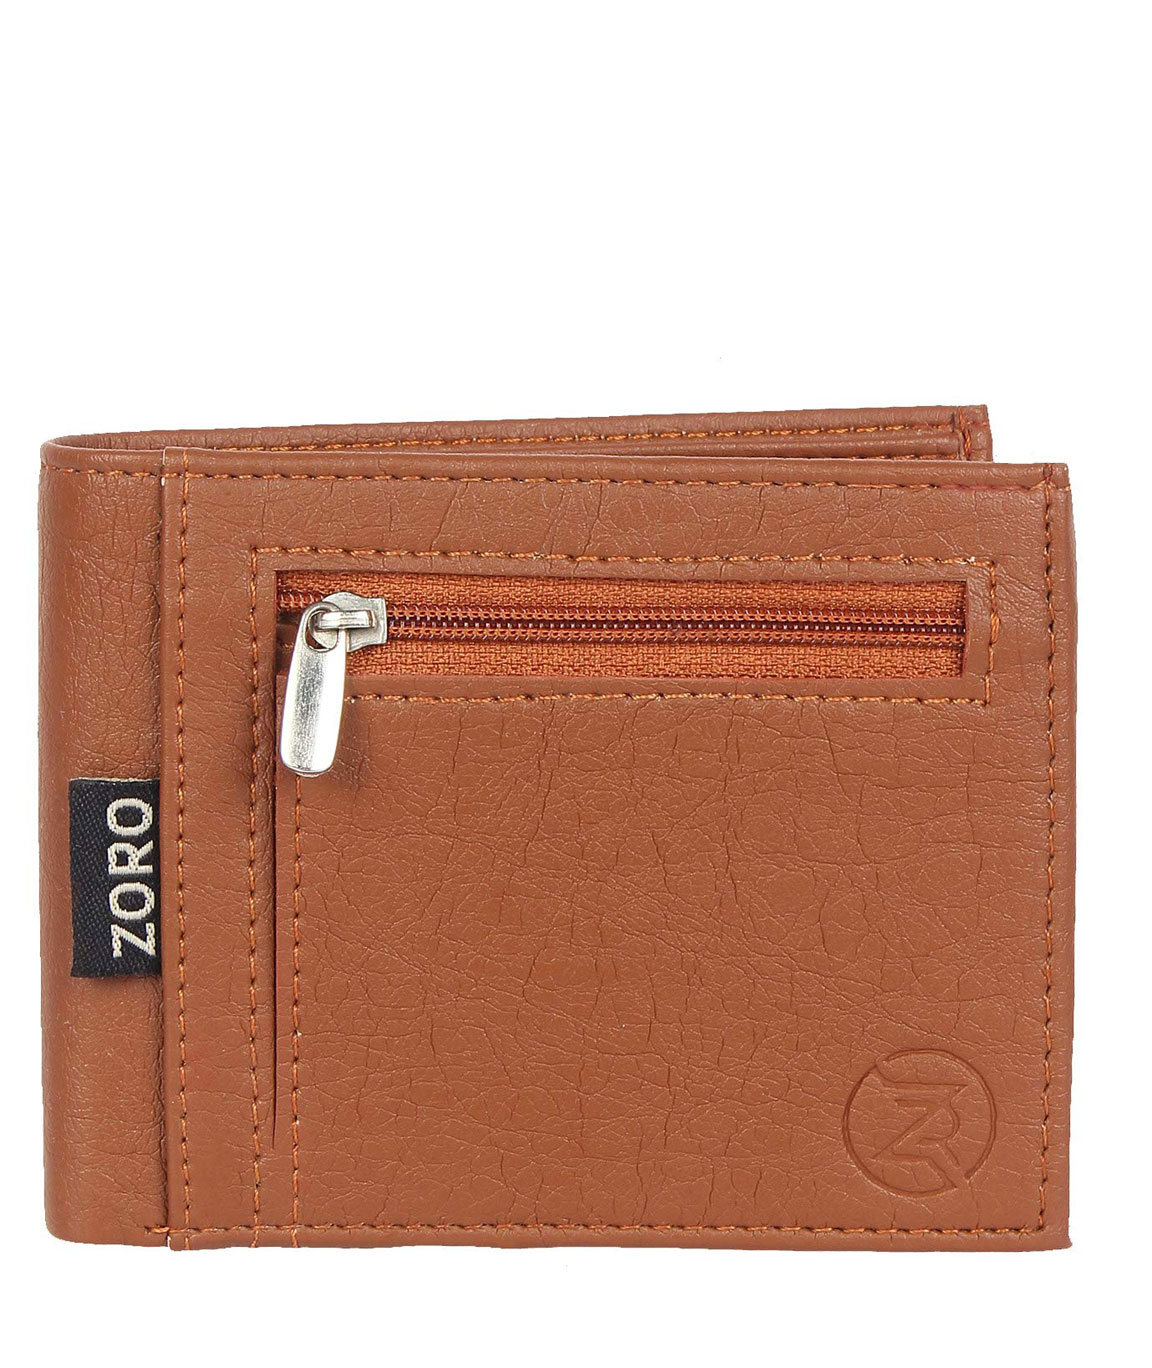 Buy Artificial Leather Wallet For Men Brown Gents Purse With Magnet Lock  Online In India At Discounted Prices